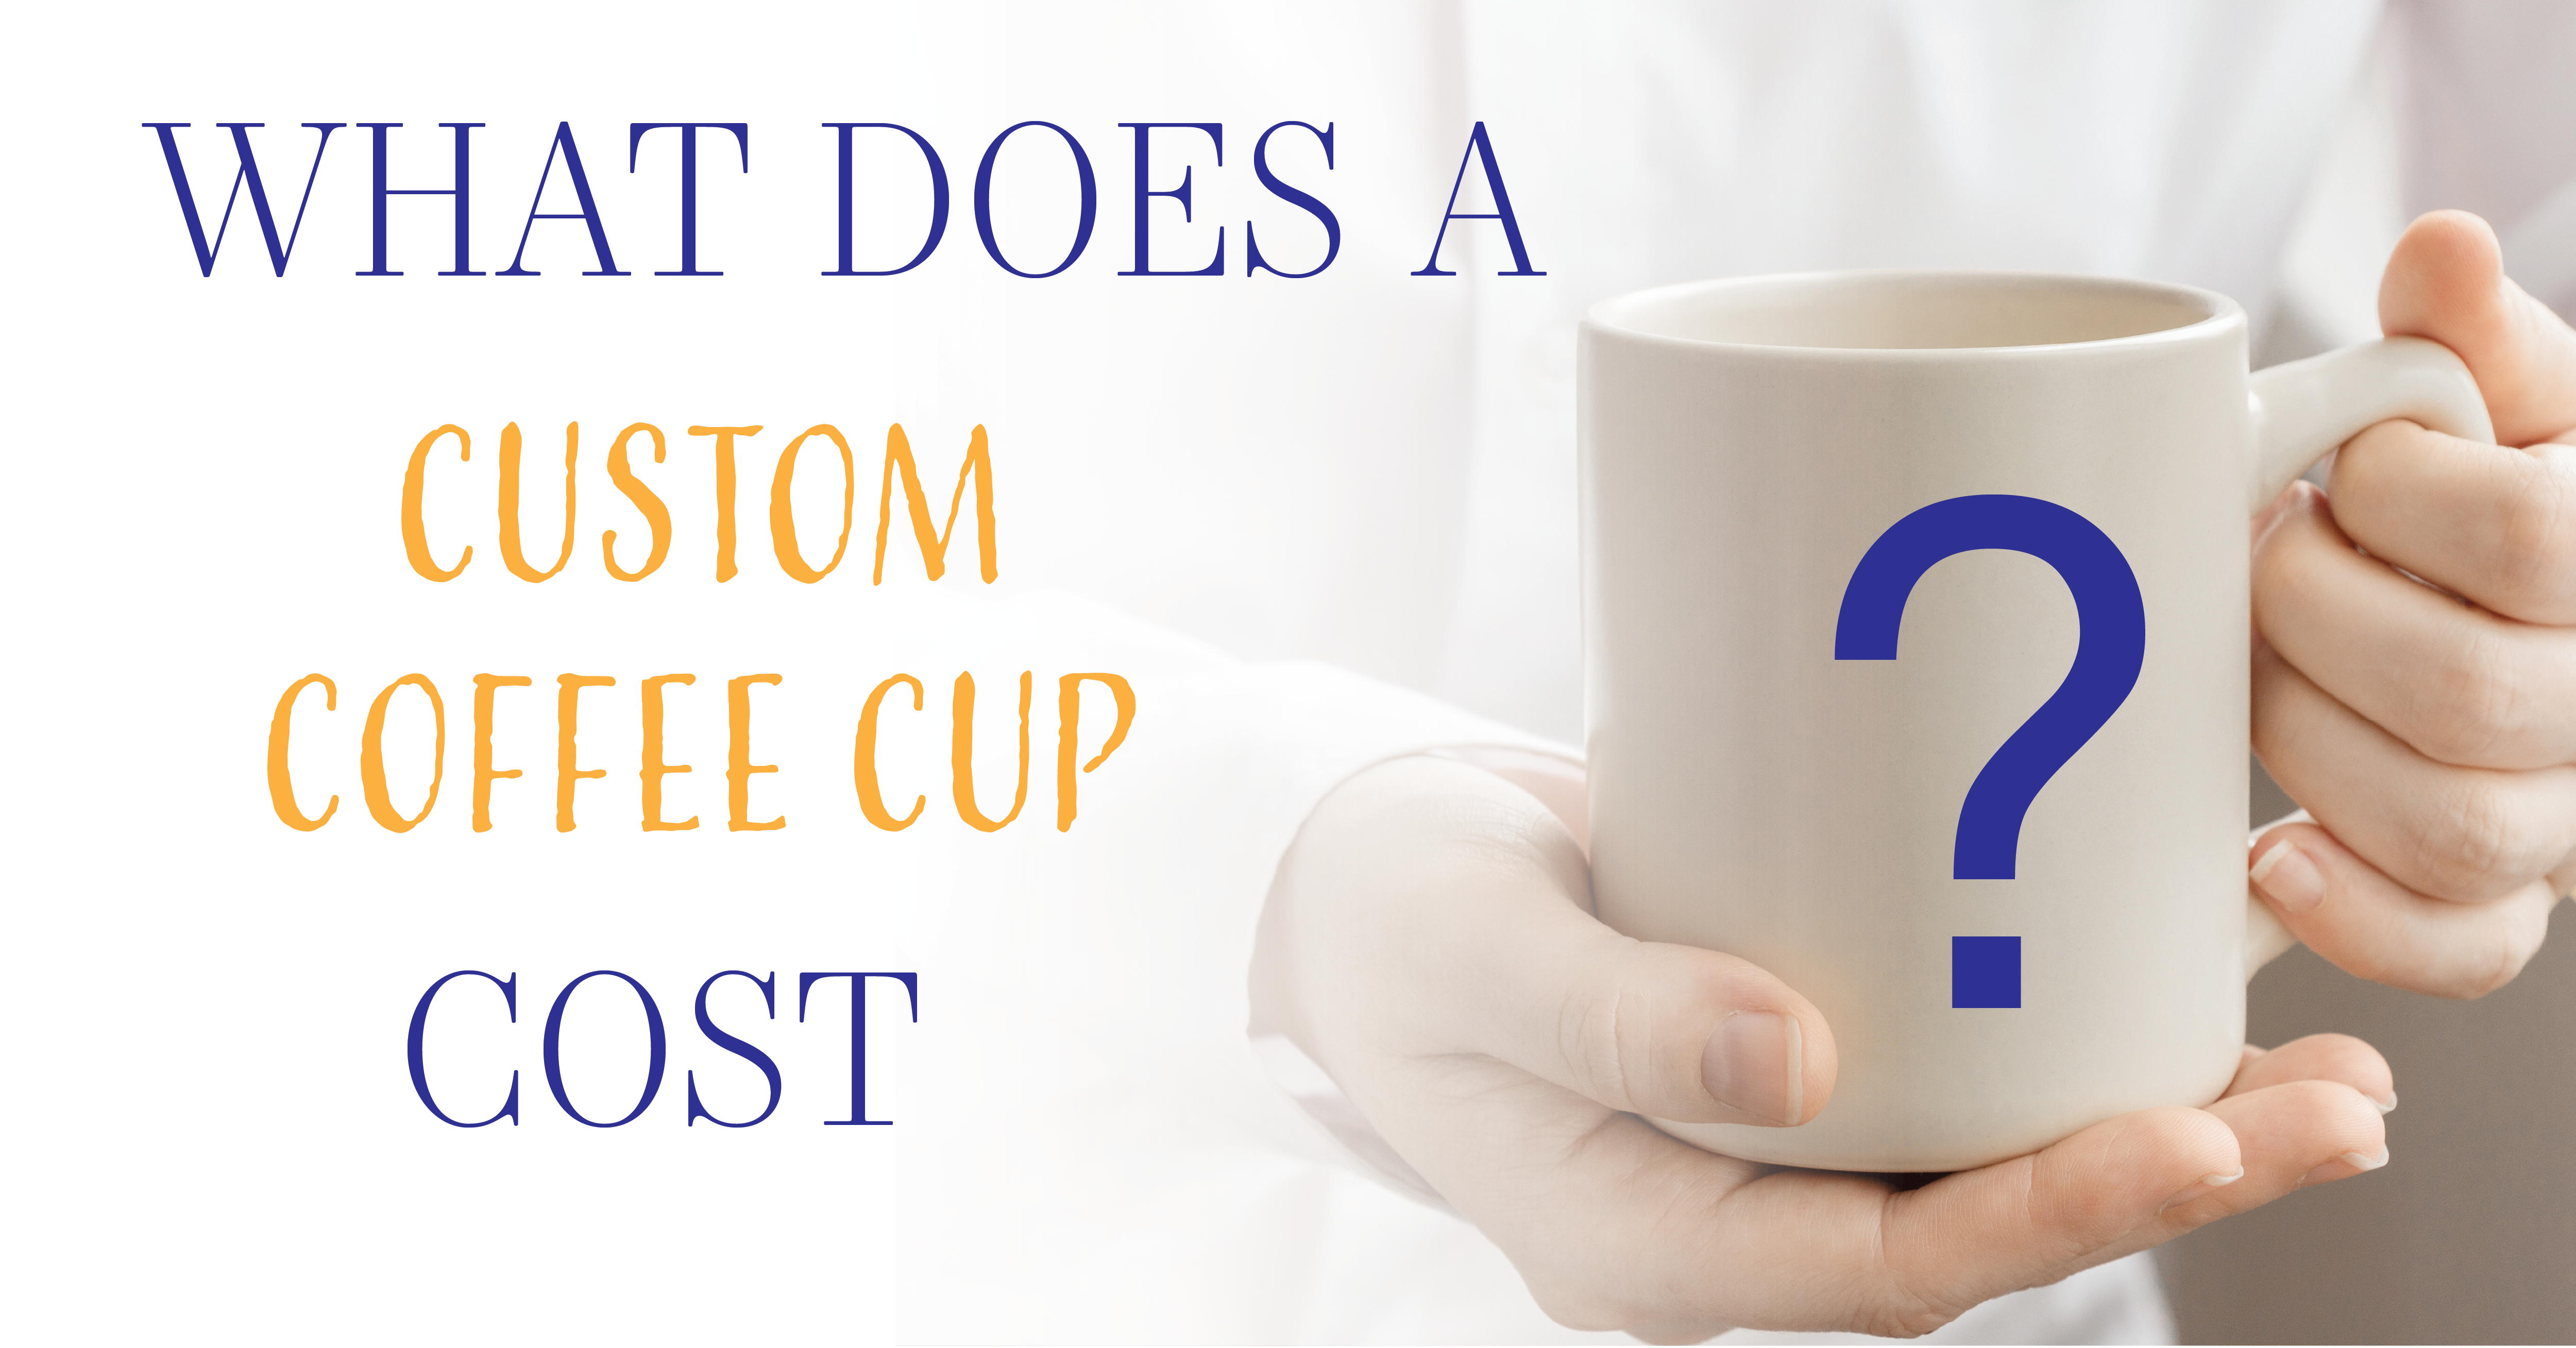 what does a branded coffee mug cost?